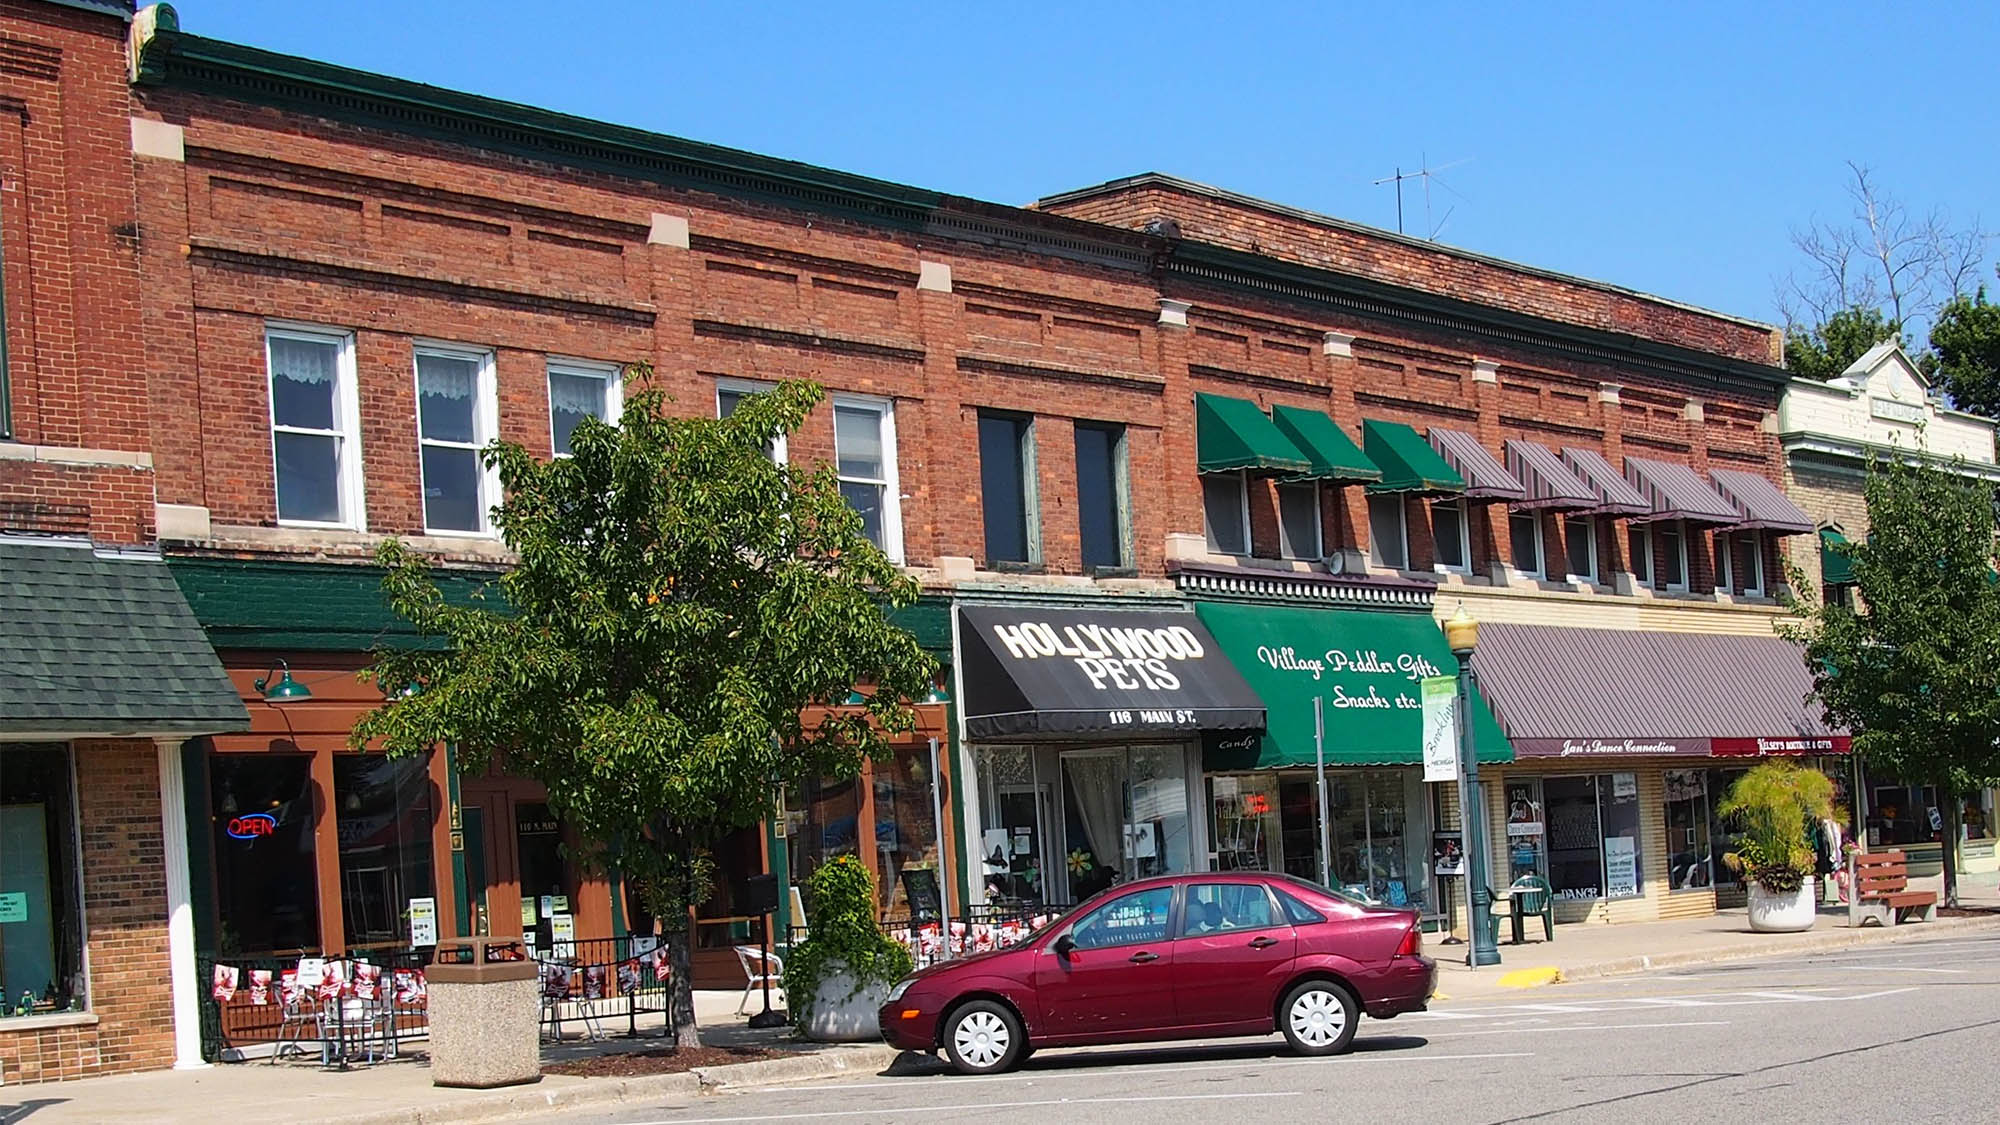 Brick storefronts with old-fashioned awnings and red car parked in front